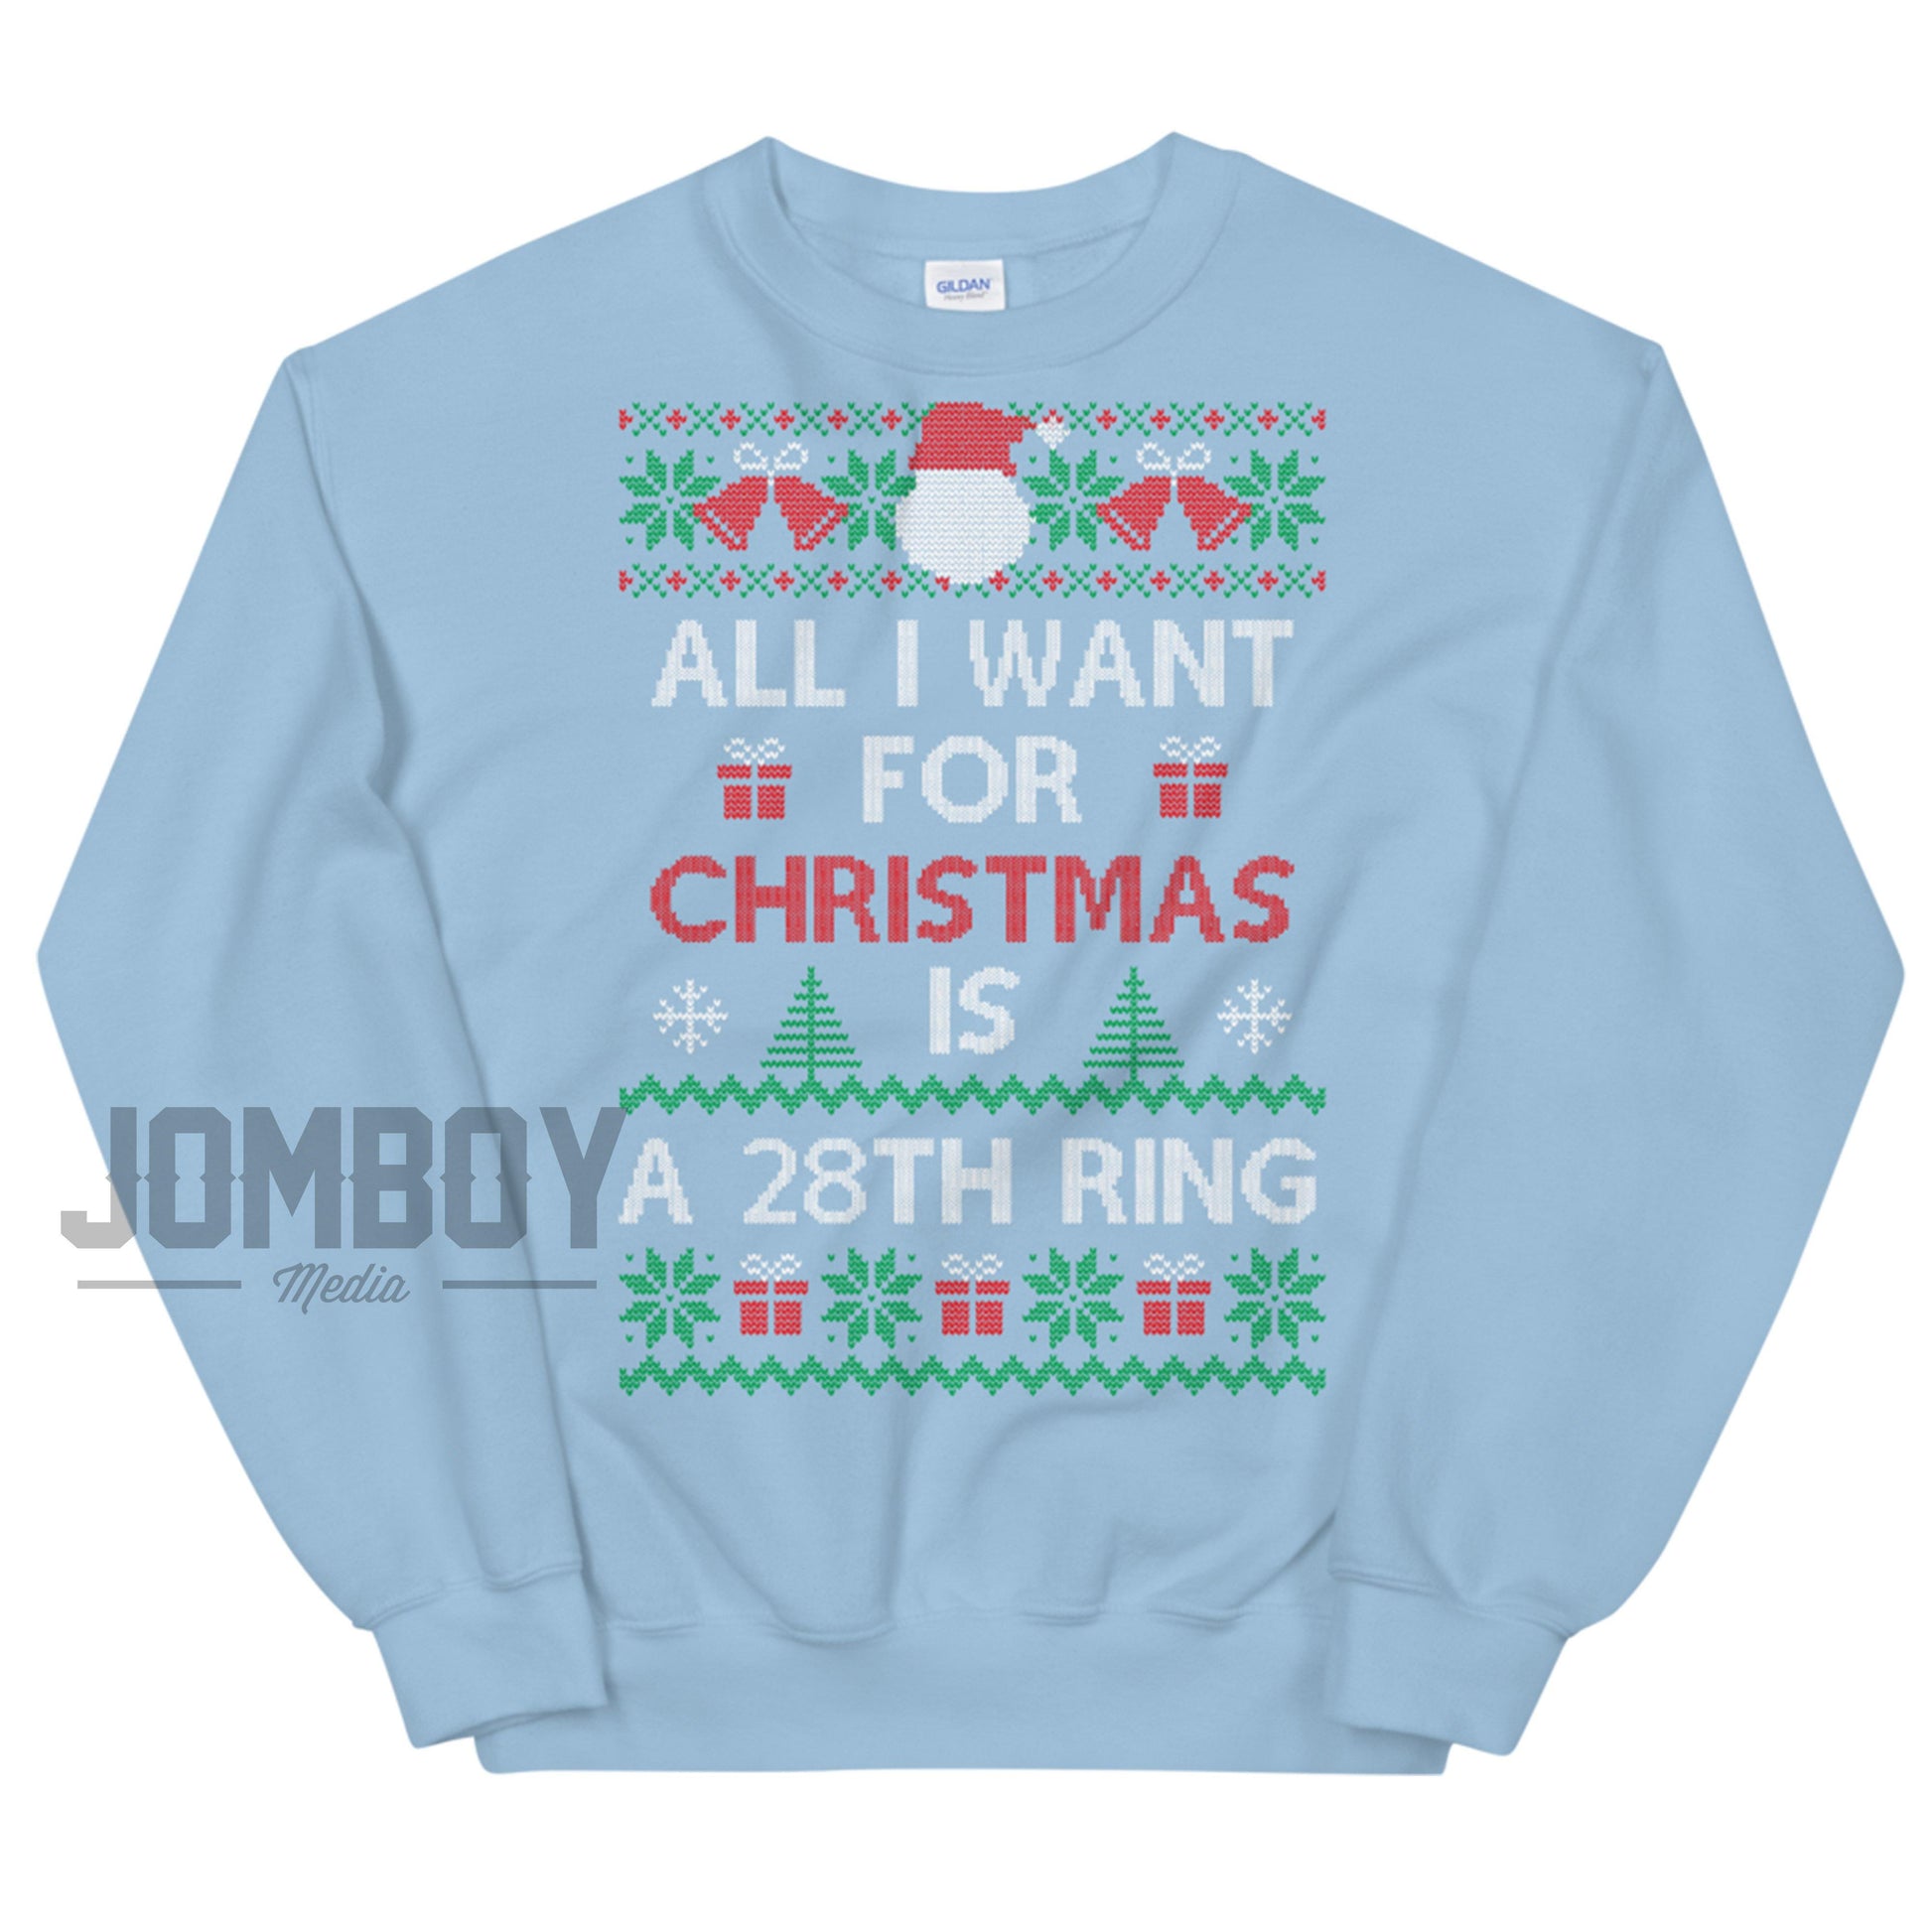 All I Want For Christmas Is A 28th Ring | Holiday Sweater - Jomboy Media